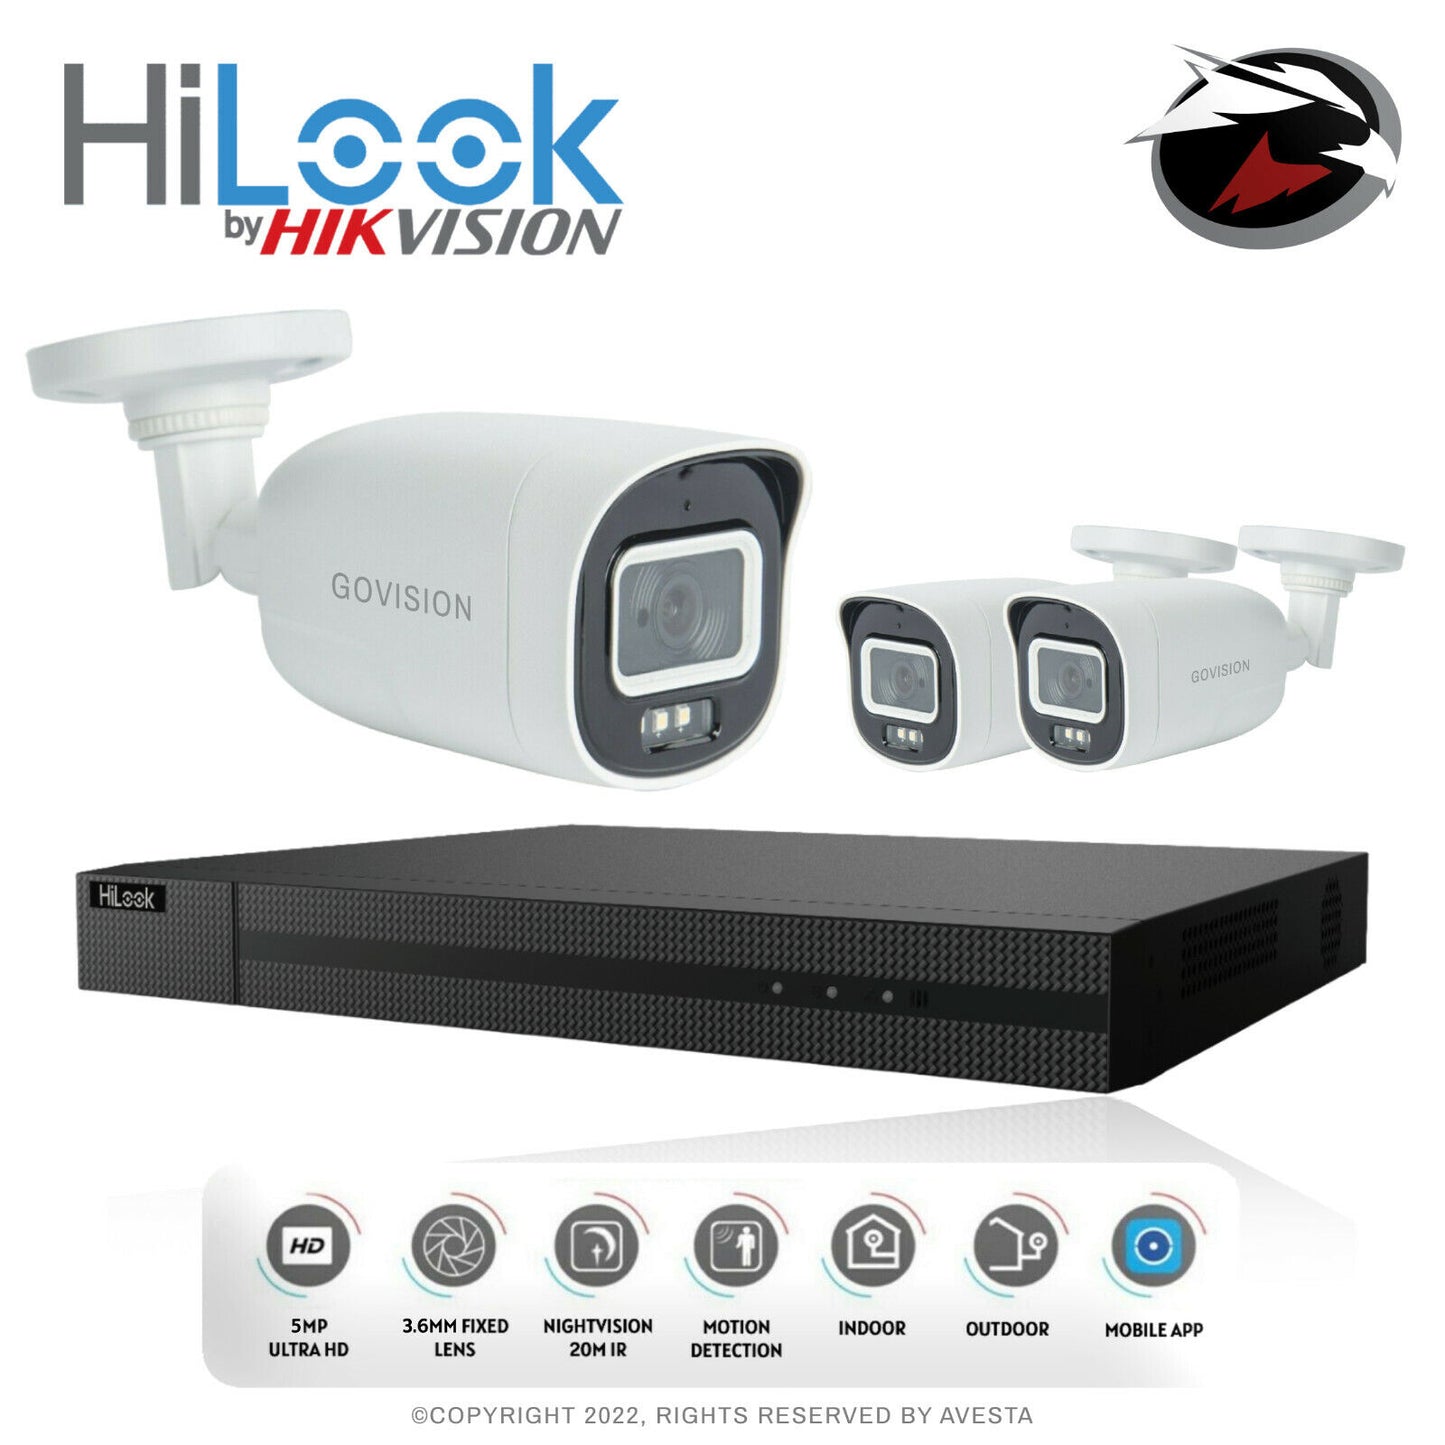 HIKVISION HILOOK 5MP CCTV SYSTEM DVR UHD 24/7 HOURS COLORFUL NIGHTVISION CAMERA 4CH DVR 3xCameras (white) 1TB HDD